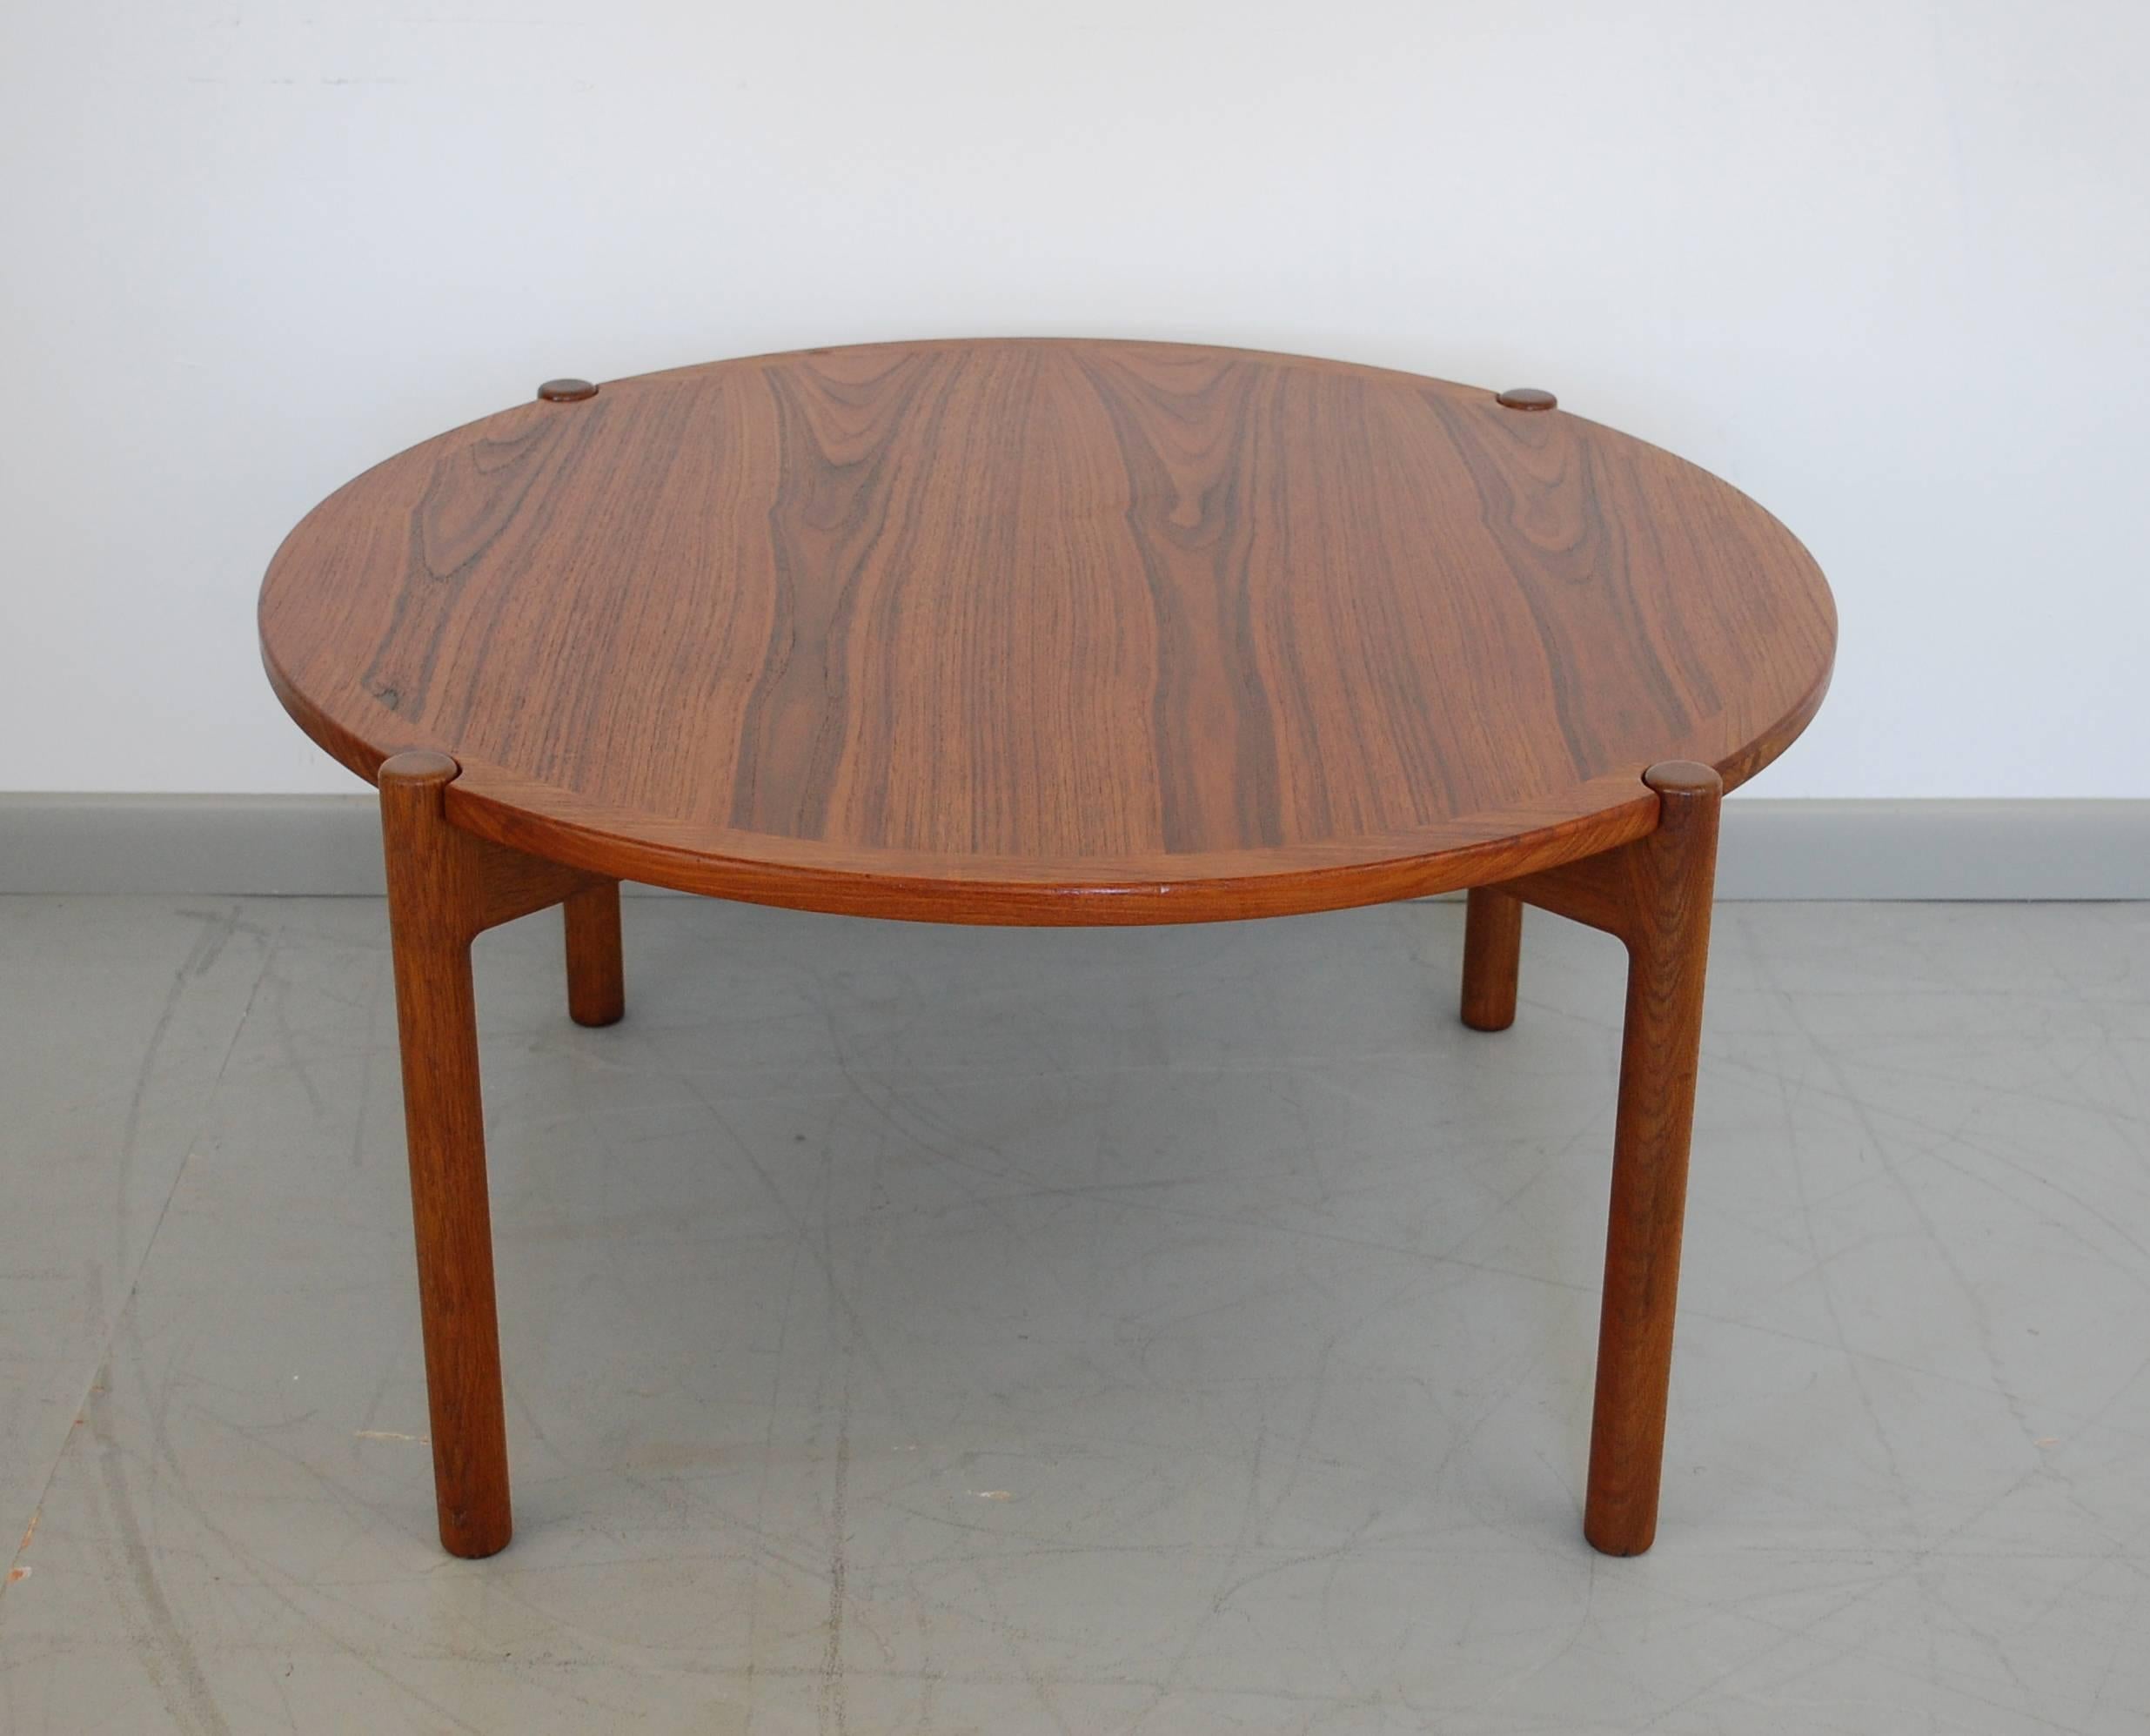 Early reversible top coffee table by Hans Wegner for Johannes Hansen. Flip-top with solid teak side and black laminate inlay side, resting on solid oak base. Teak and oak both newly restored. Stamped Johannes Hansen.